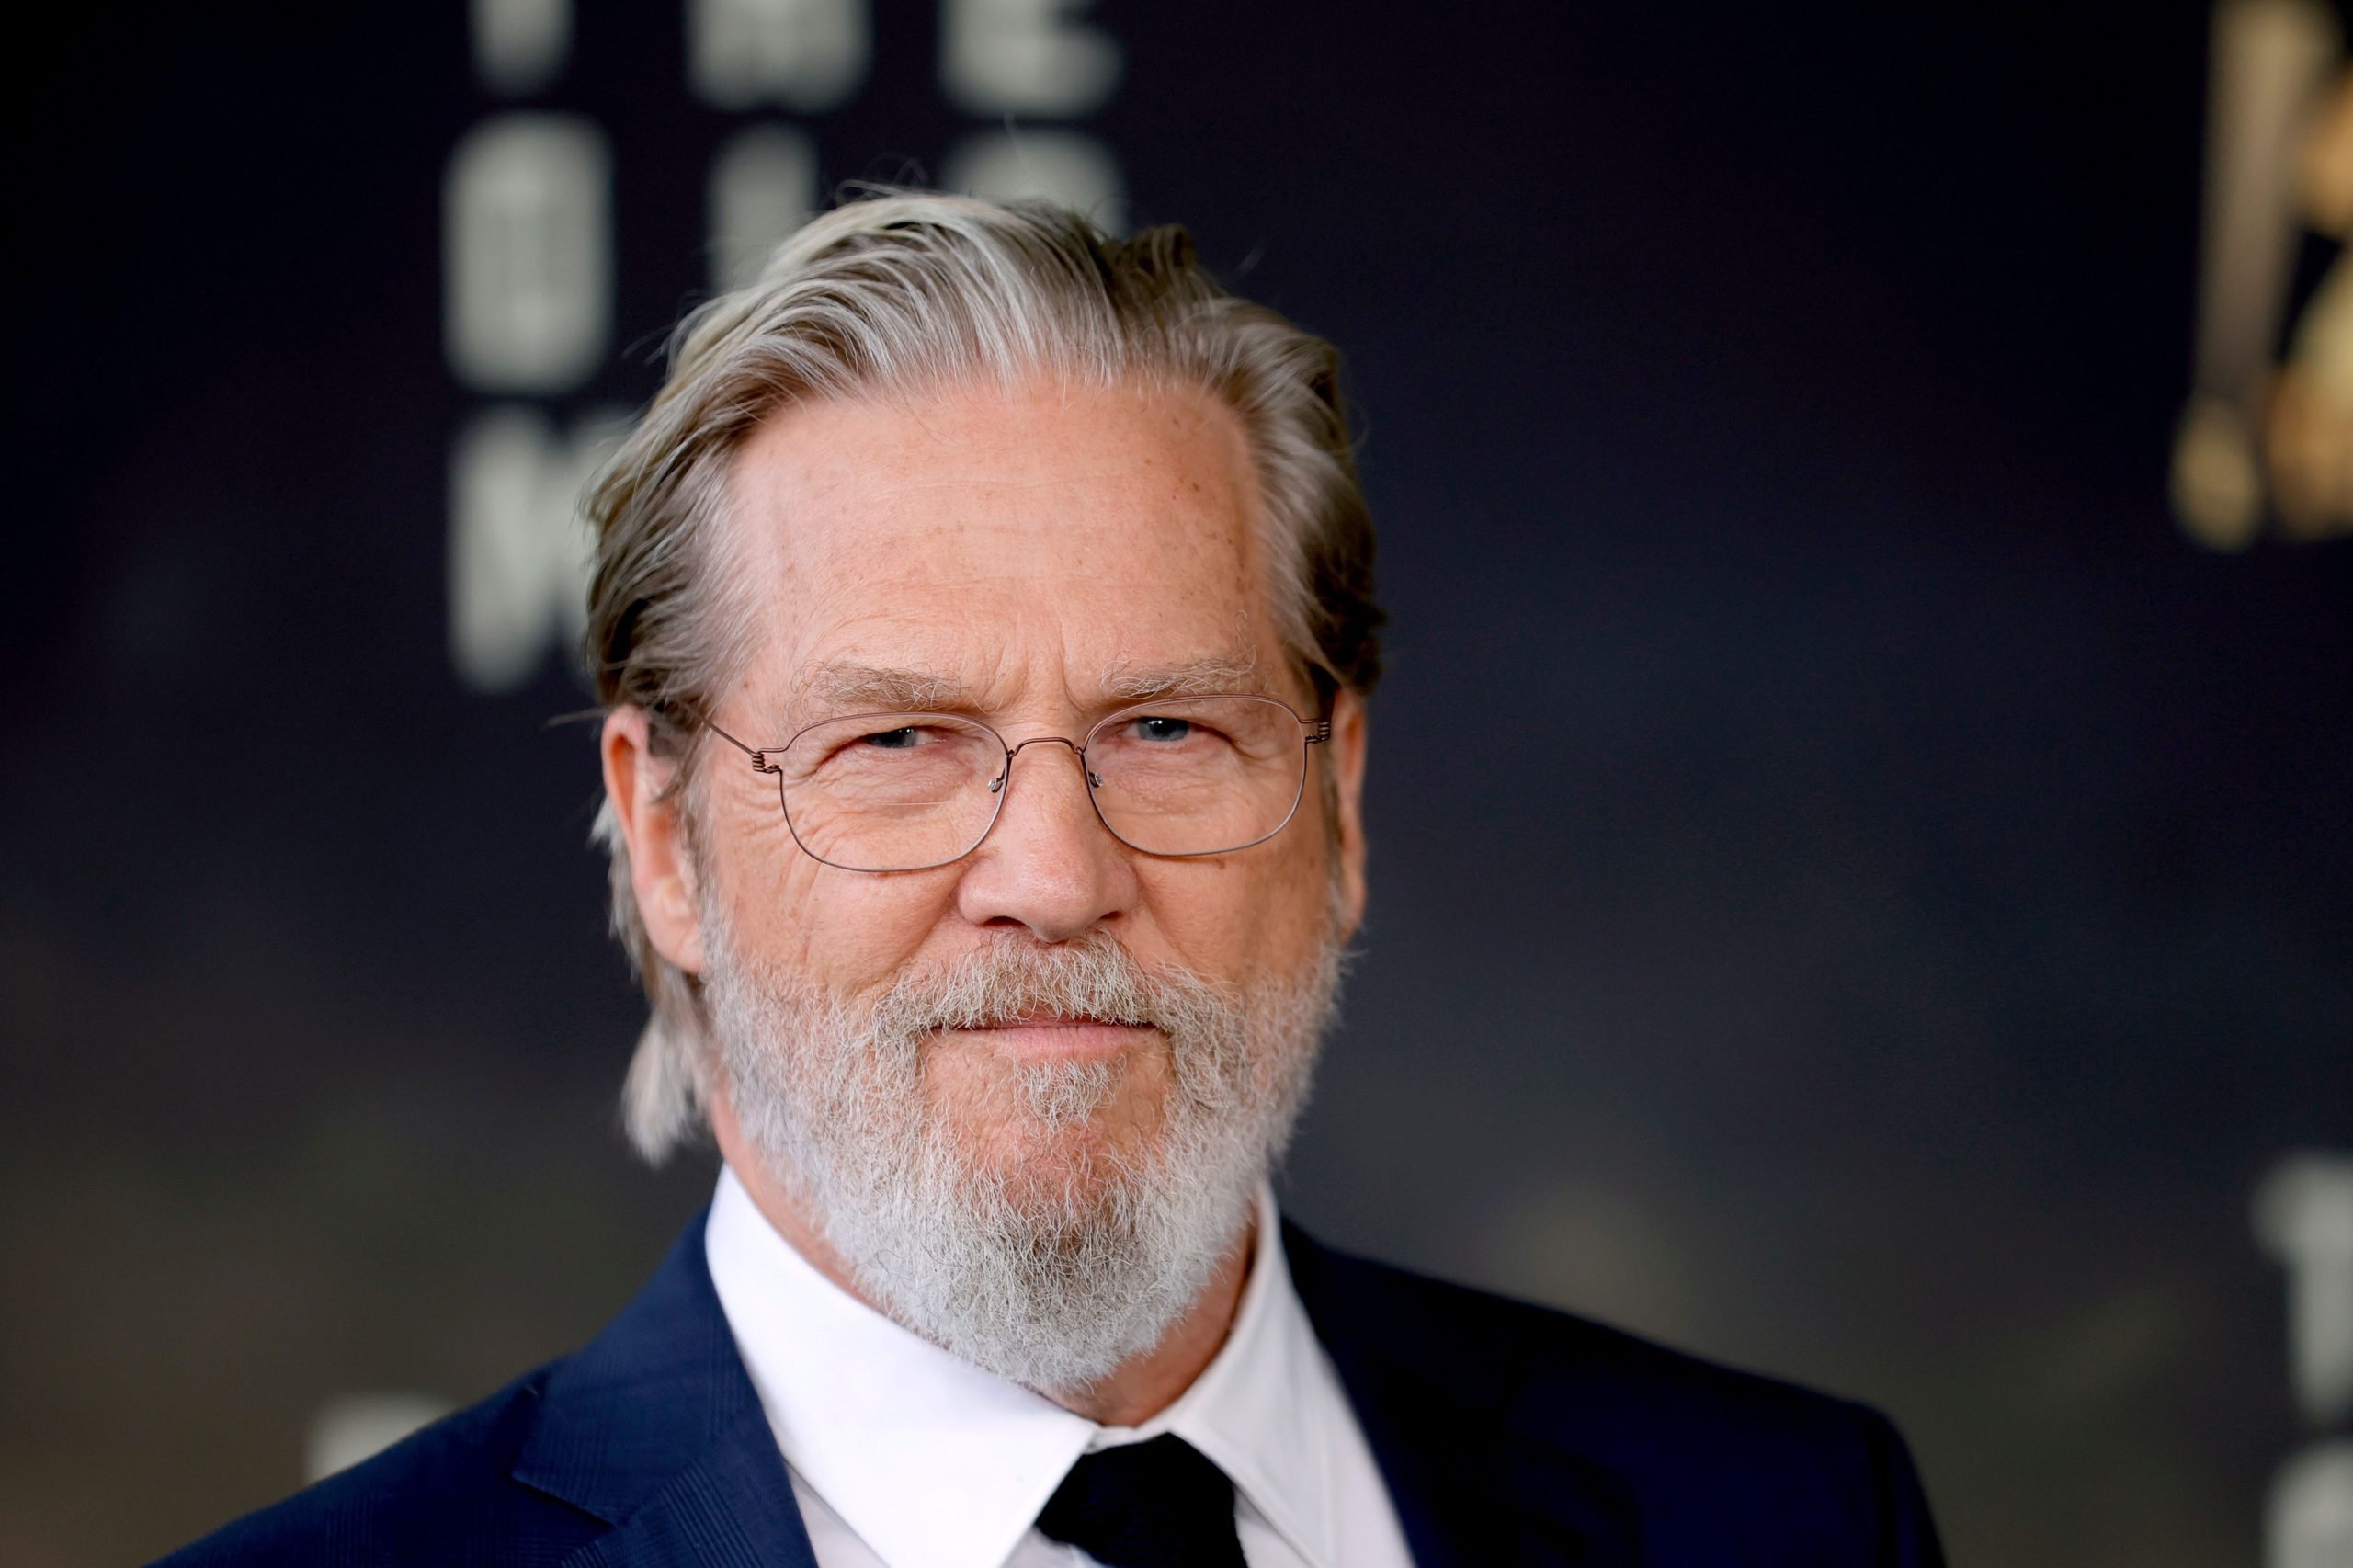 LOS ANGELES, CALIFORNIA - JUNE 08: Jeff Bridges attends FX's "The Old Man" Season 1 LA Tastemaker Event at Academy Museum of Motion Pictures on June 08, 2022 in Los Angeles, California. (Photo by Frazer Harrison/Getty Images)